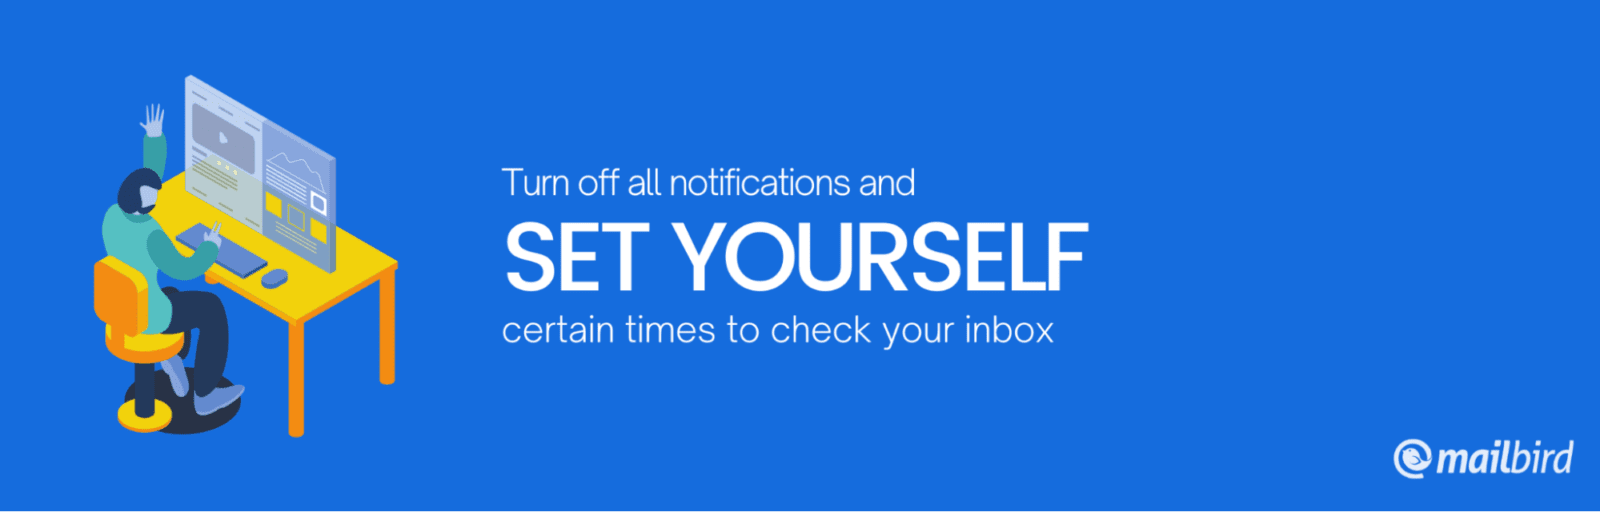 turn off email notifications